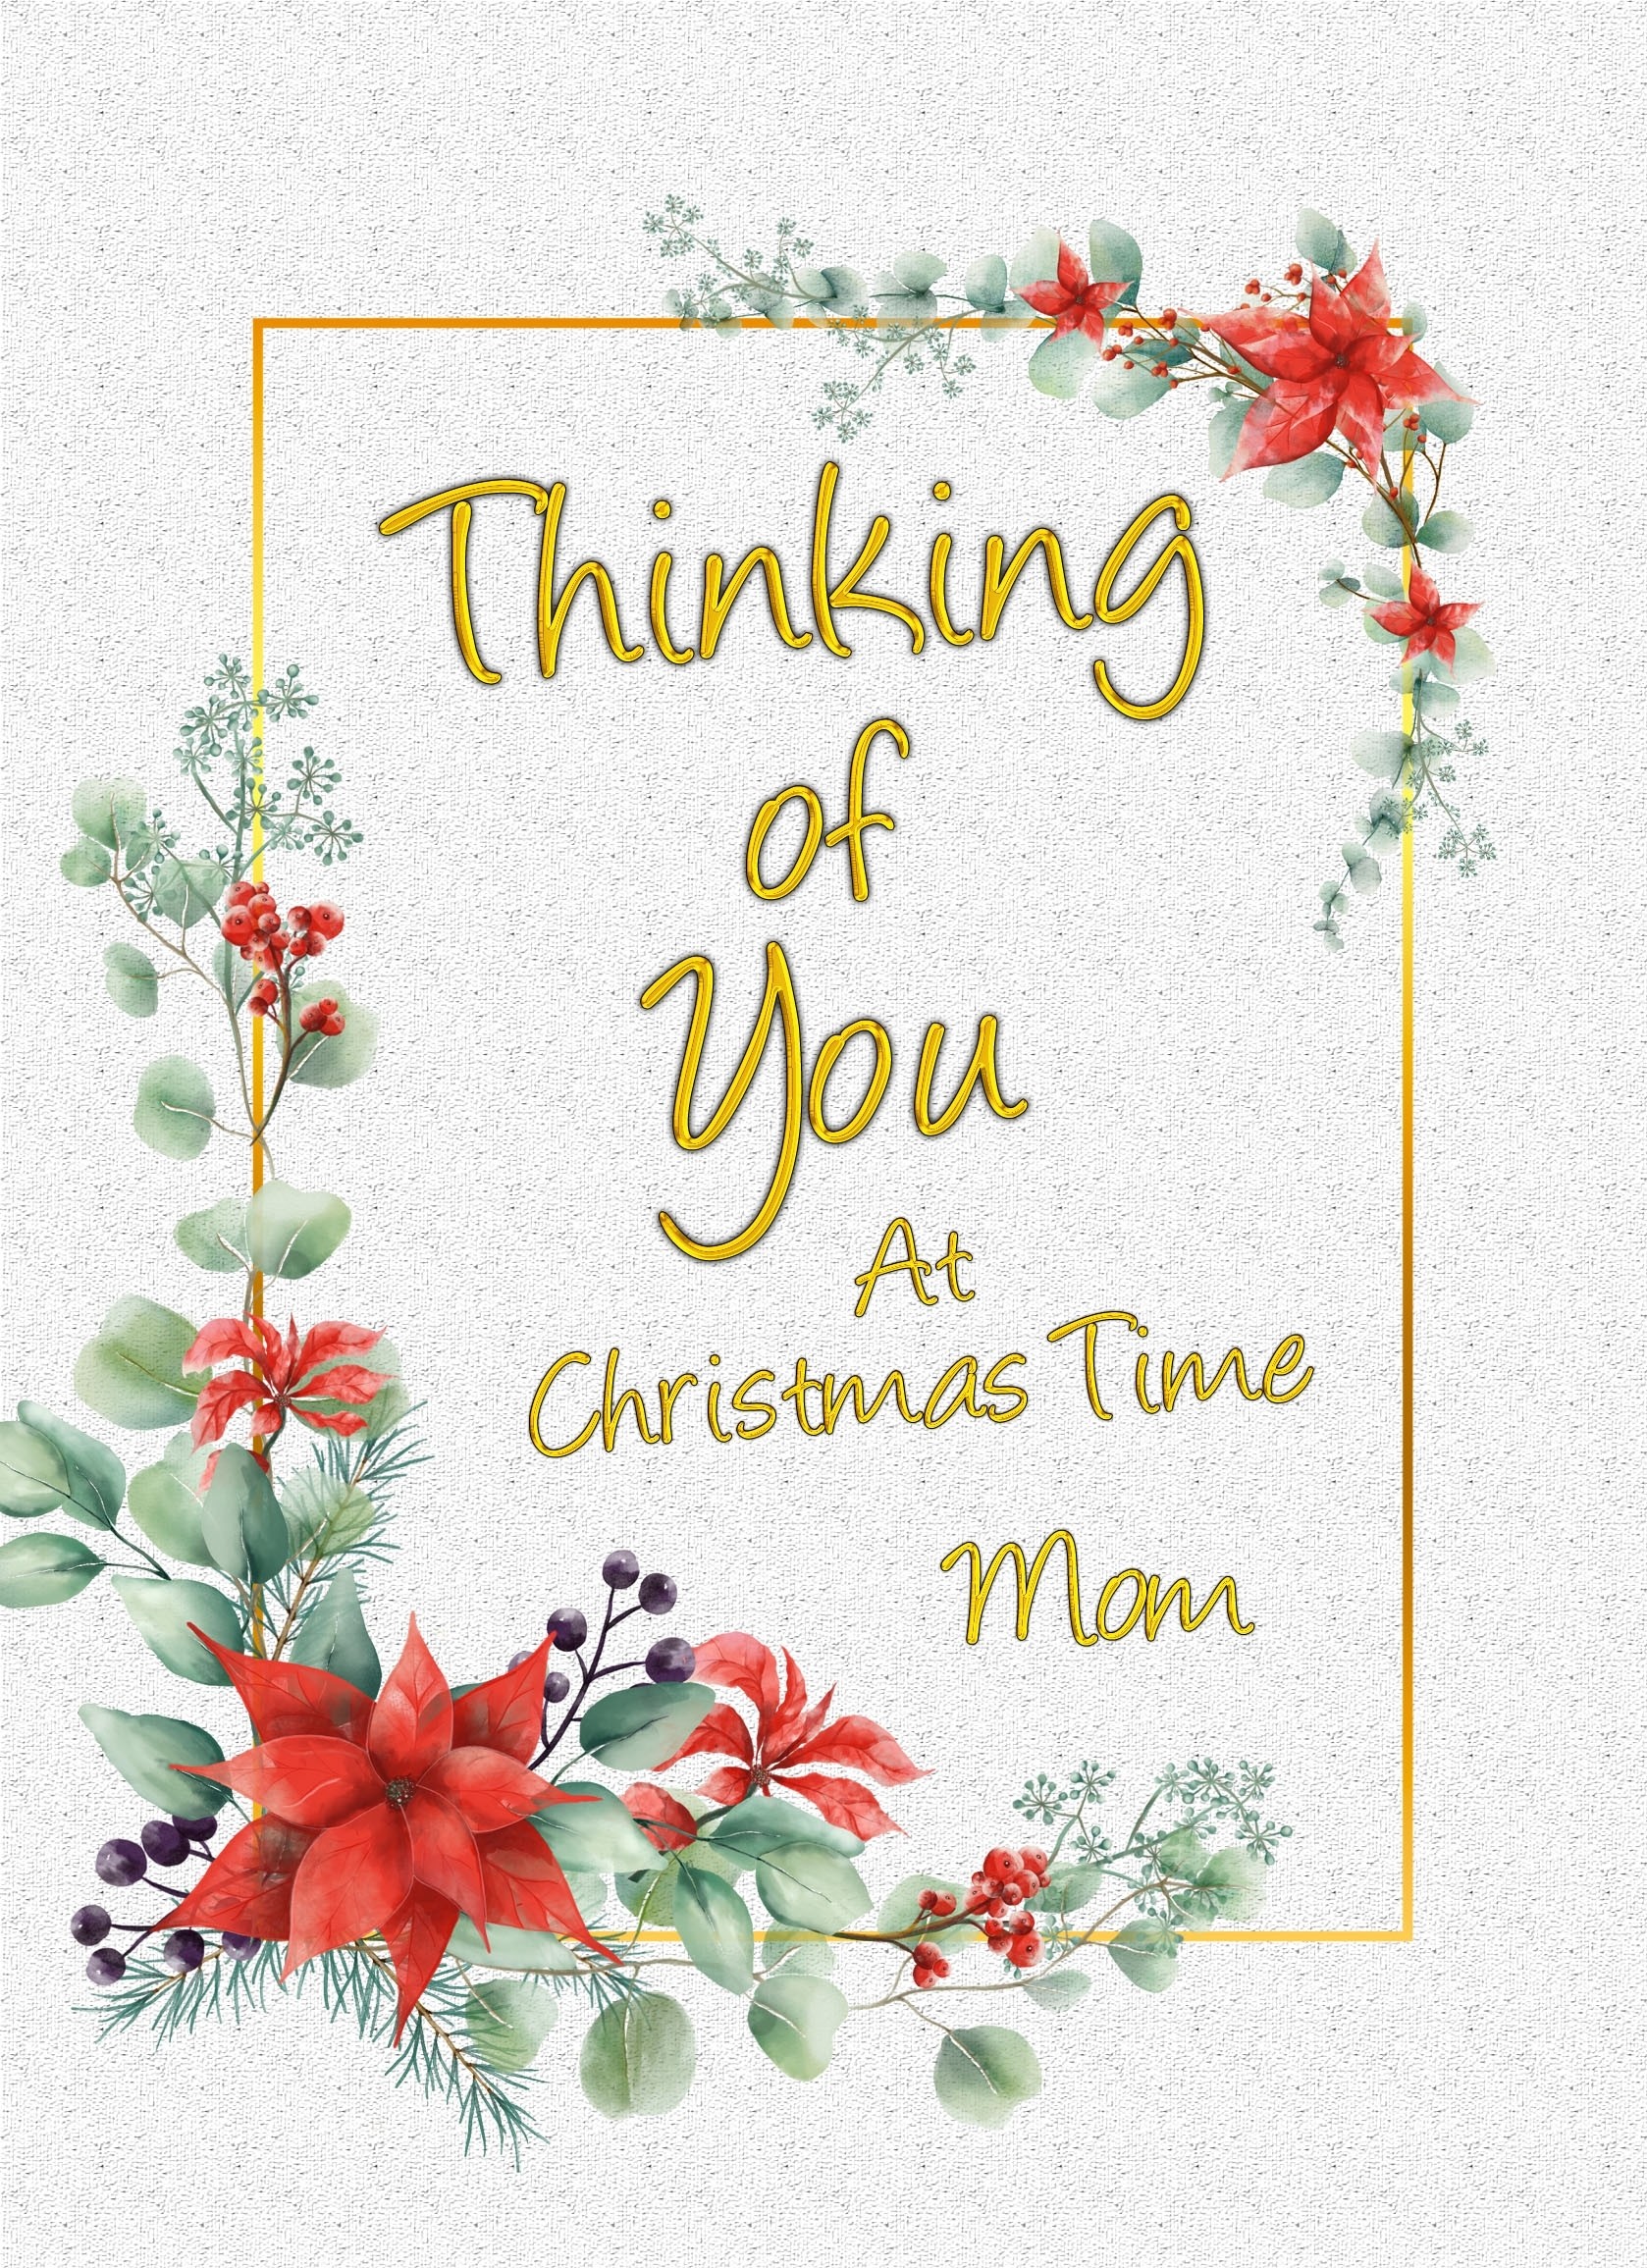 Thinking of You at Christmas Card For Mom